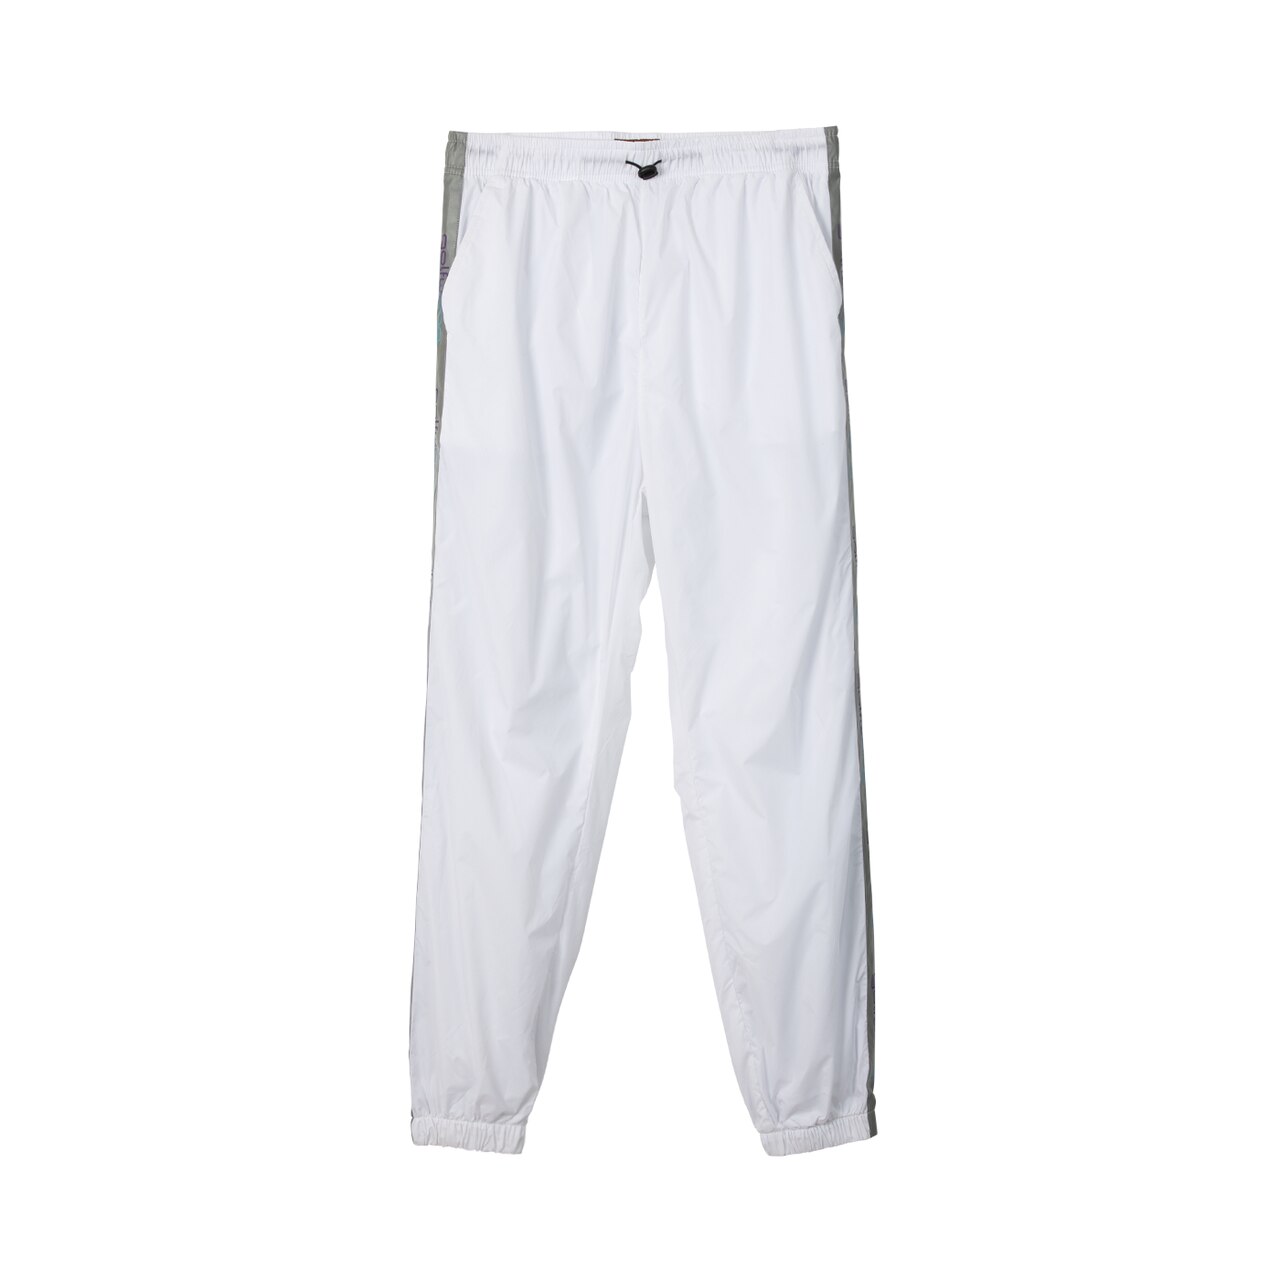 GOLF THEQUE 3M TRACK PANTS WHITE